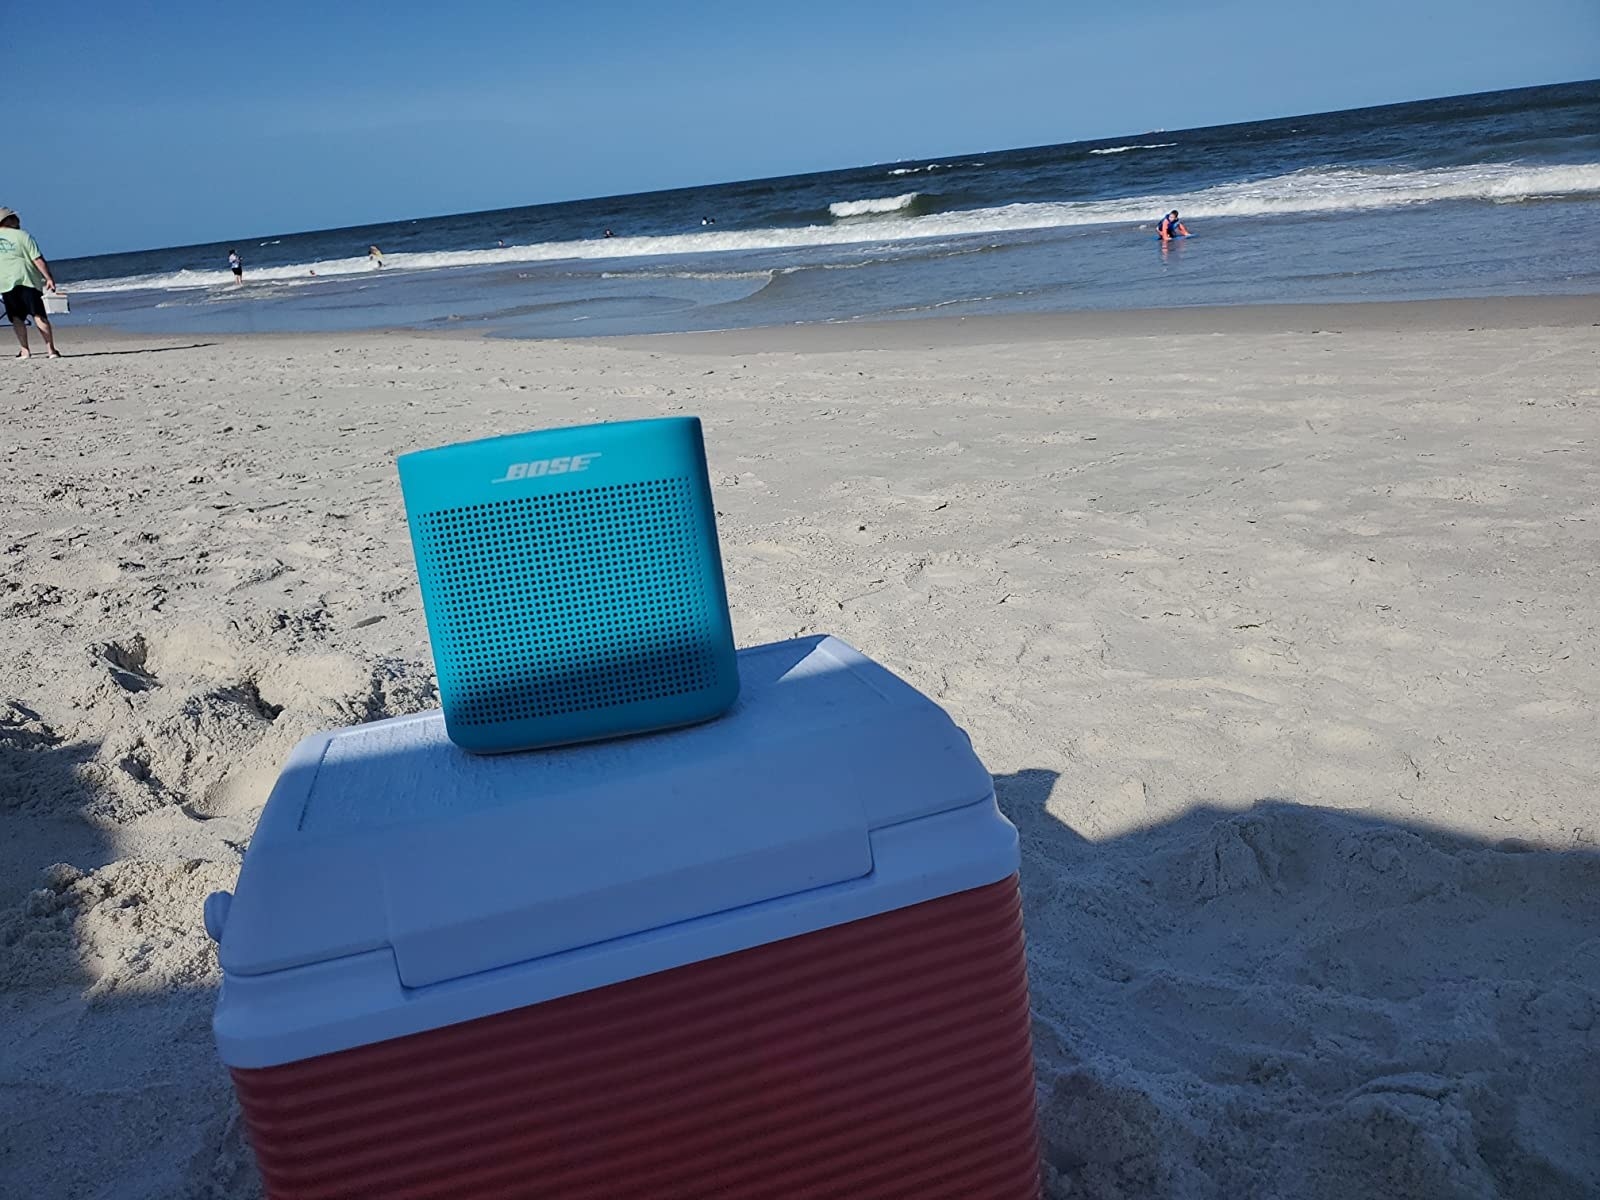 The blue speaker propped up on a cooler at the beach